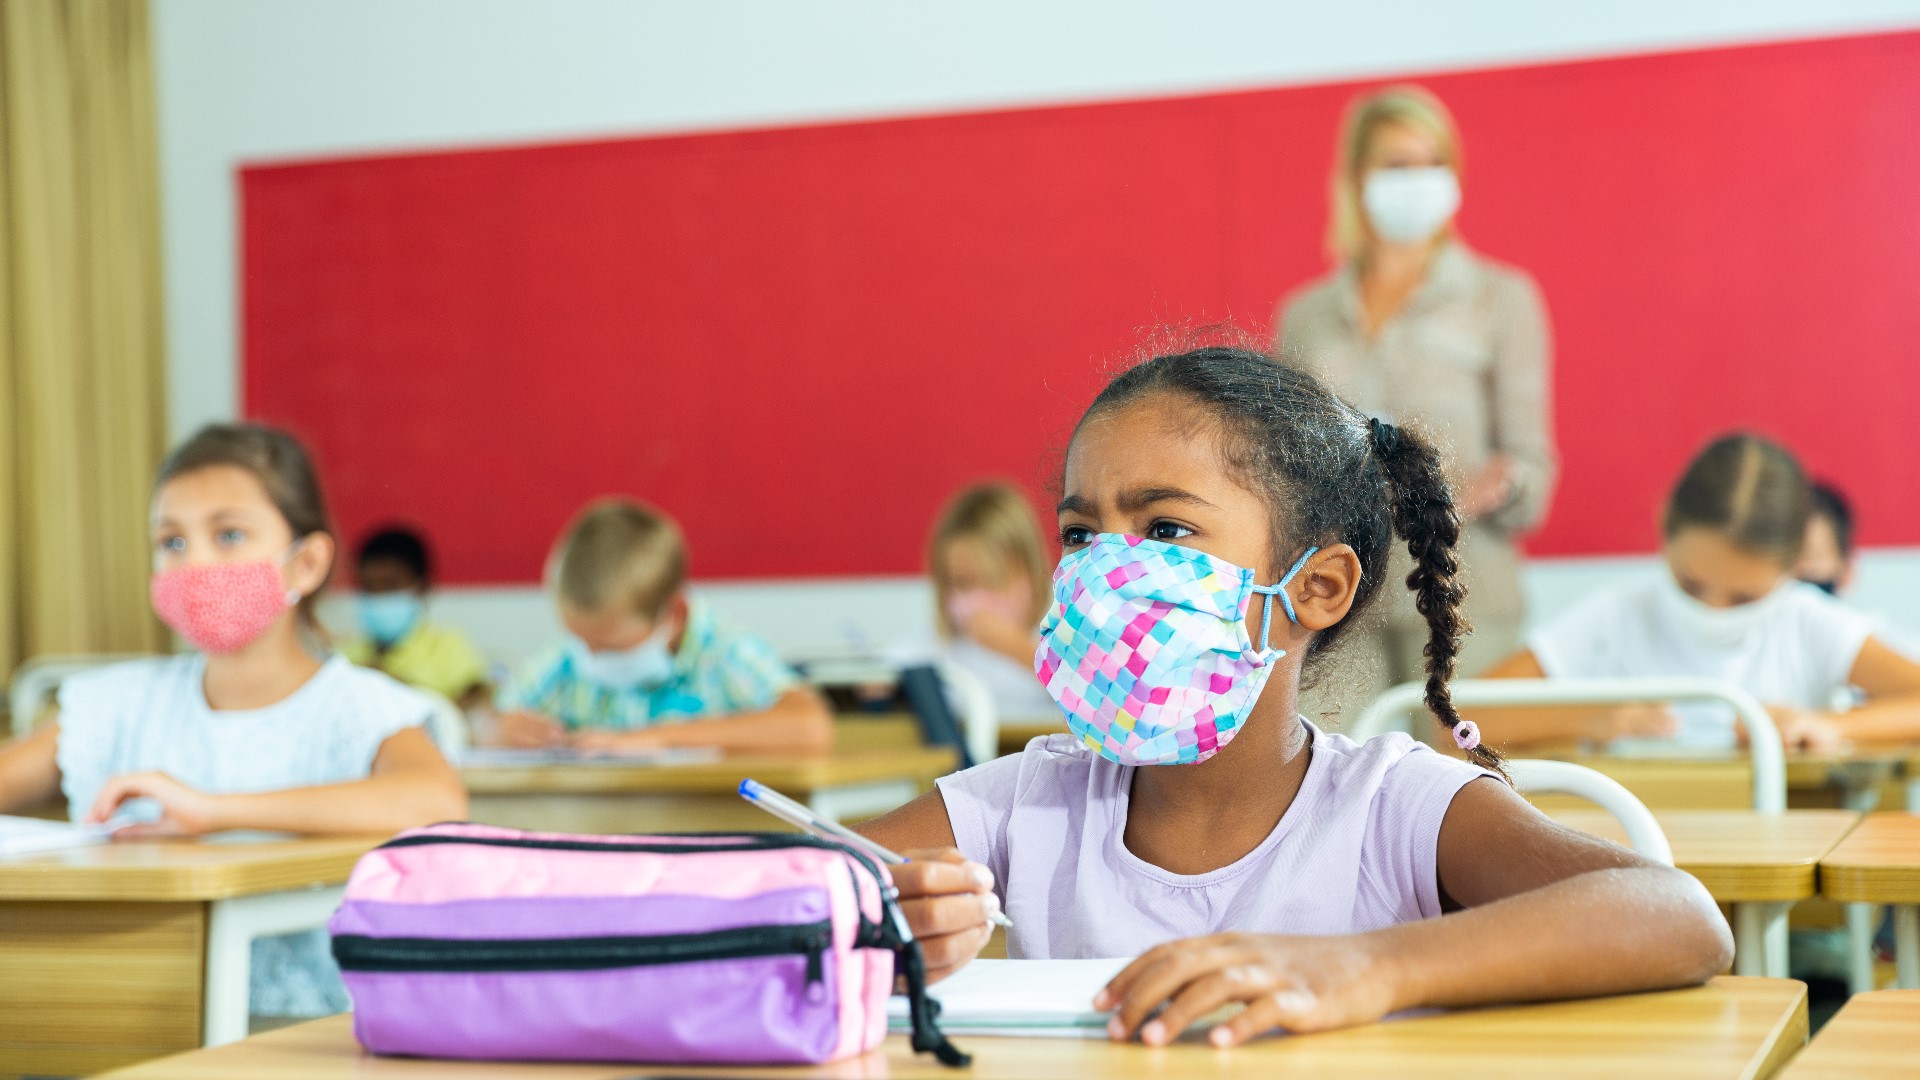 CMS acknowledged in its plan that it will take a multi-year recovery effort to make up the learning that was lost amid the pandemic.